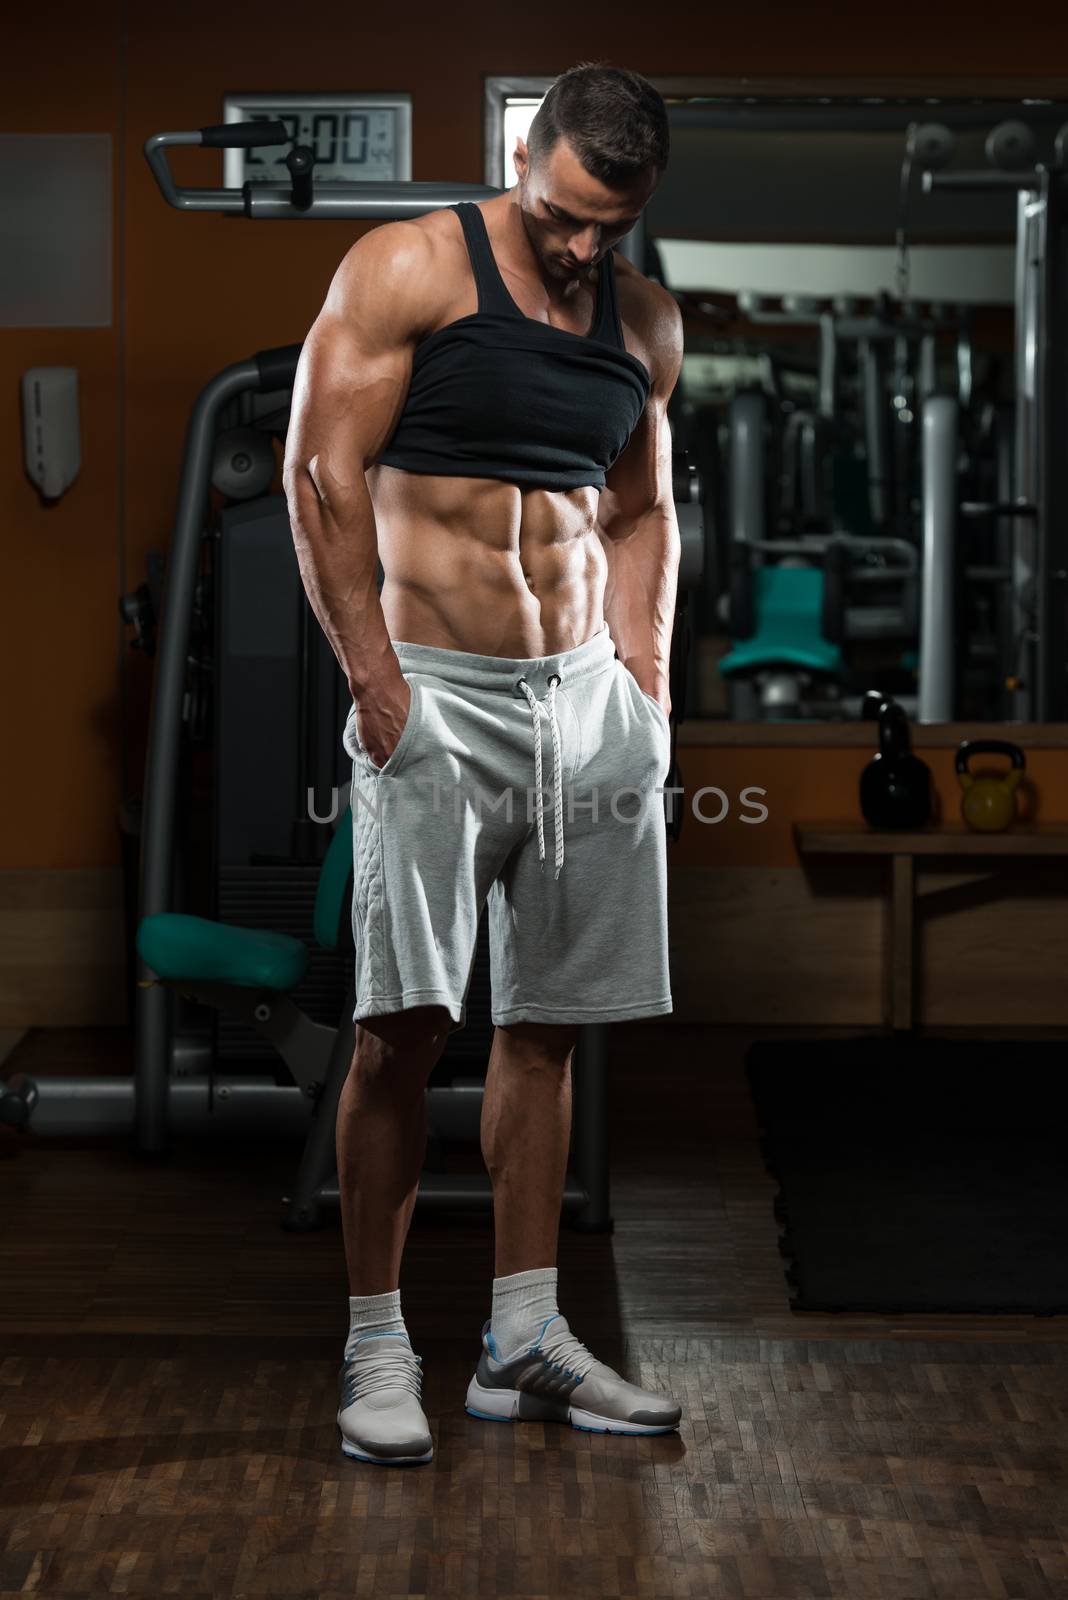 Portrait Of A Physically Fit Young Man In A Healthy Club by JalePhoto